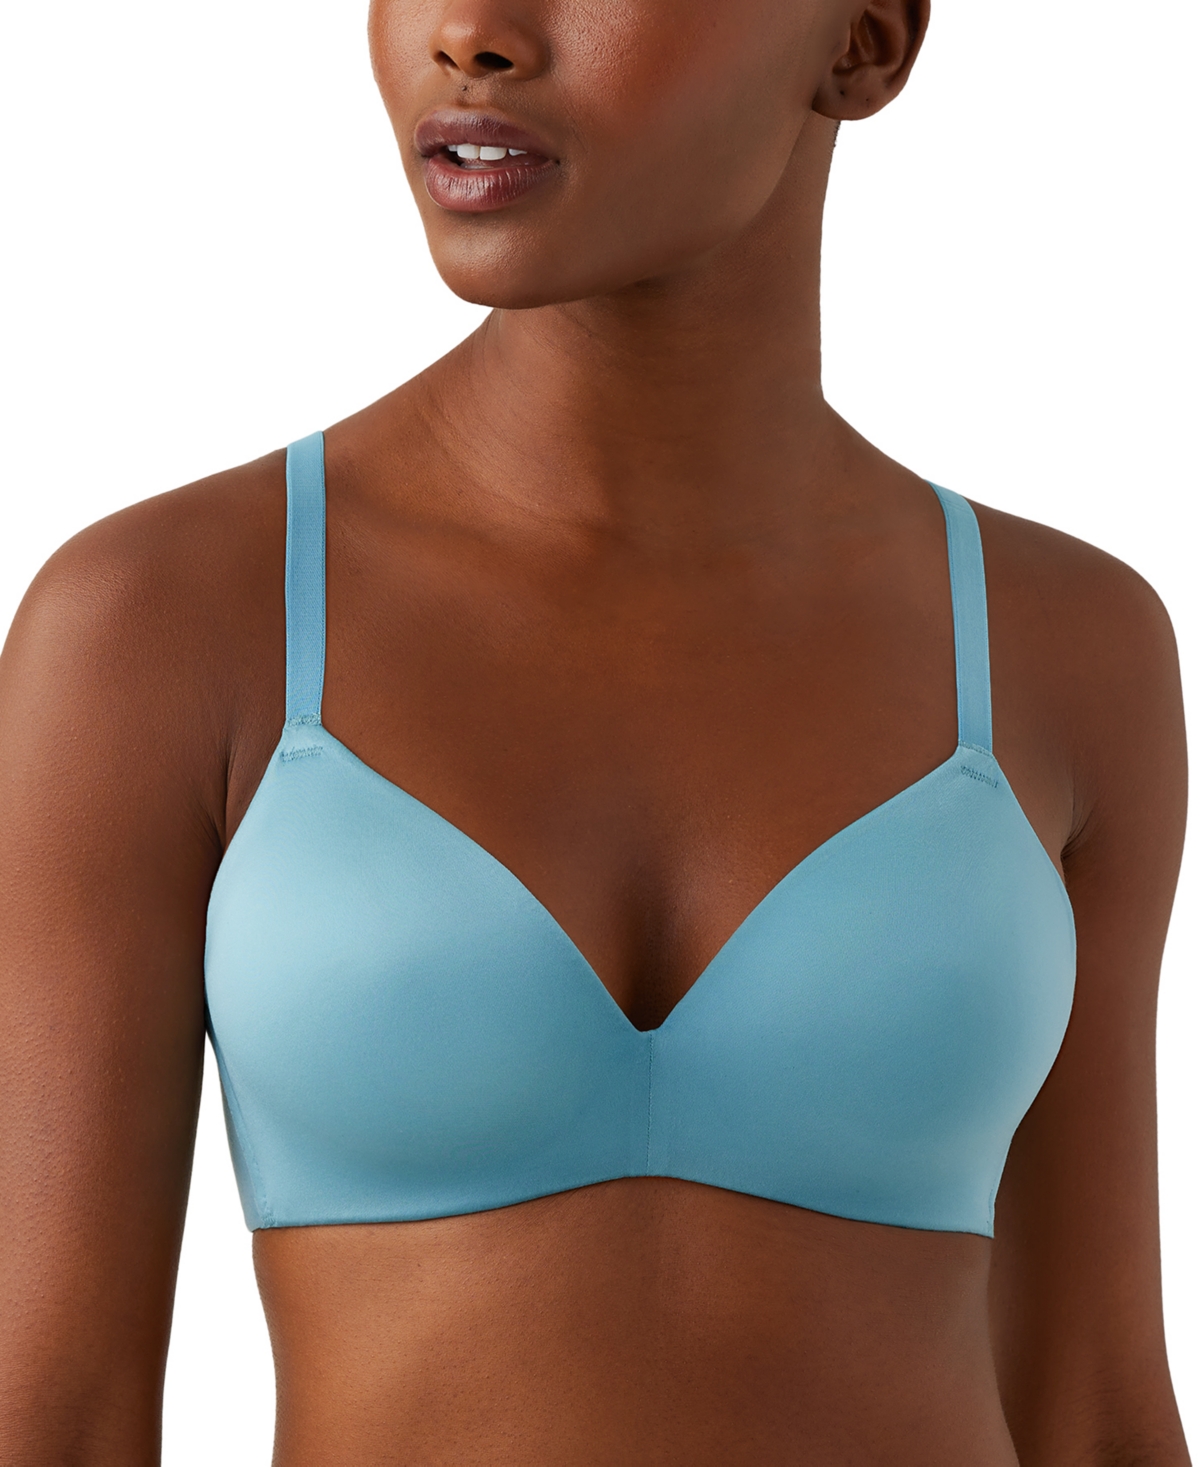 by Wacoal Women's Future Foundation Wire-Free Bra 956281 - Au Natural